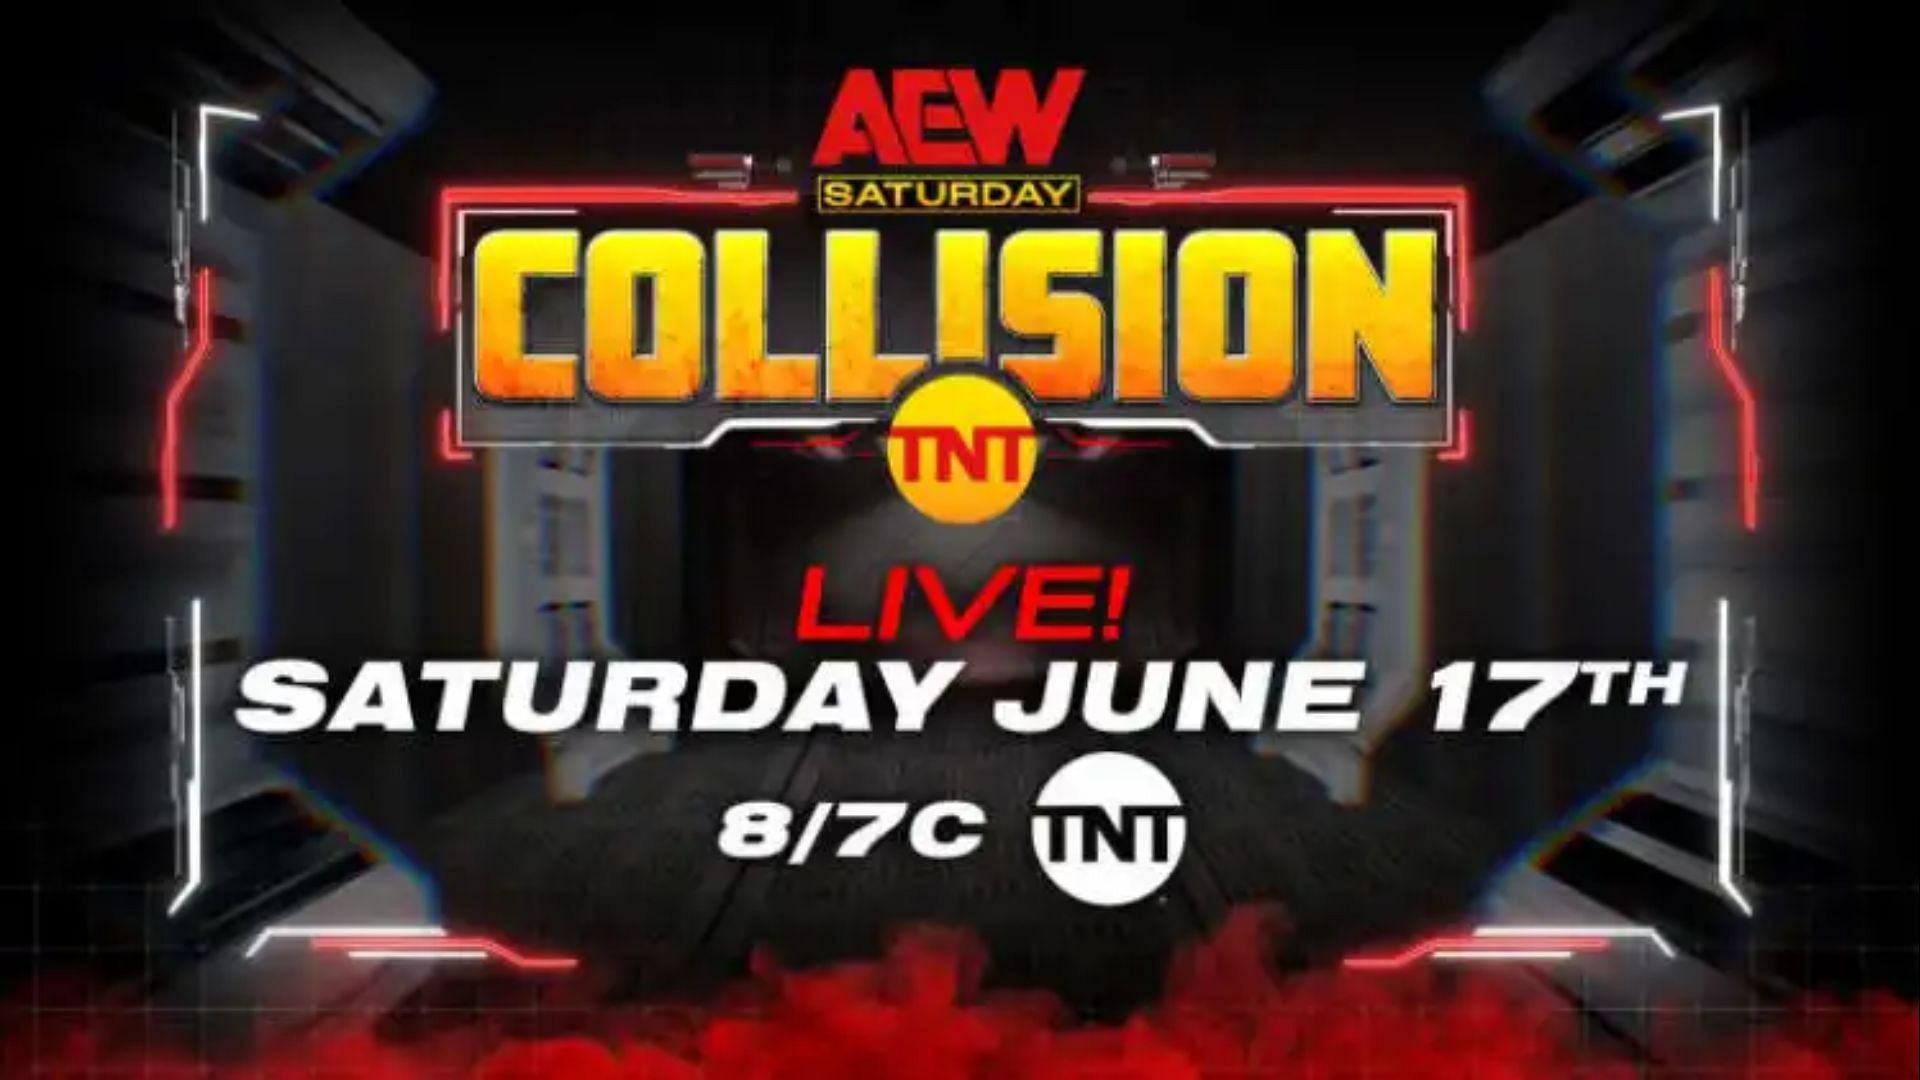 Could this veteran appear on AEW Collision sometime soon?